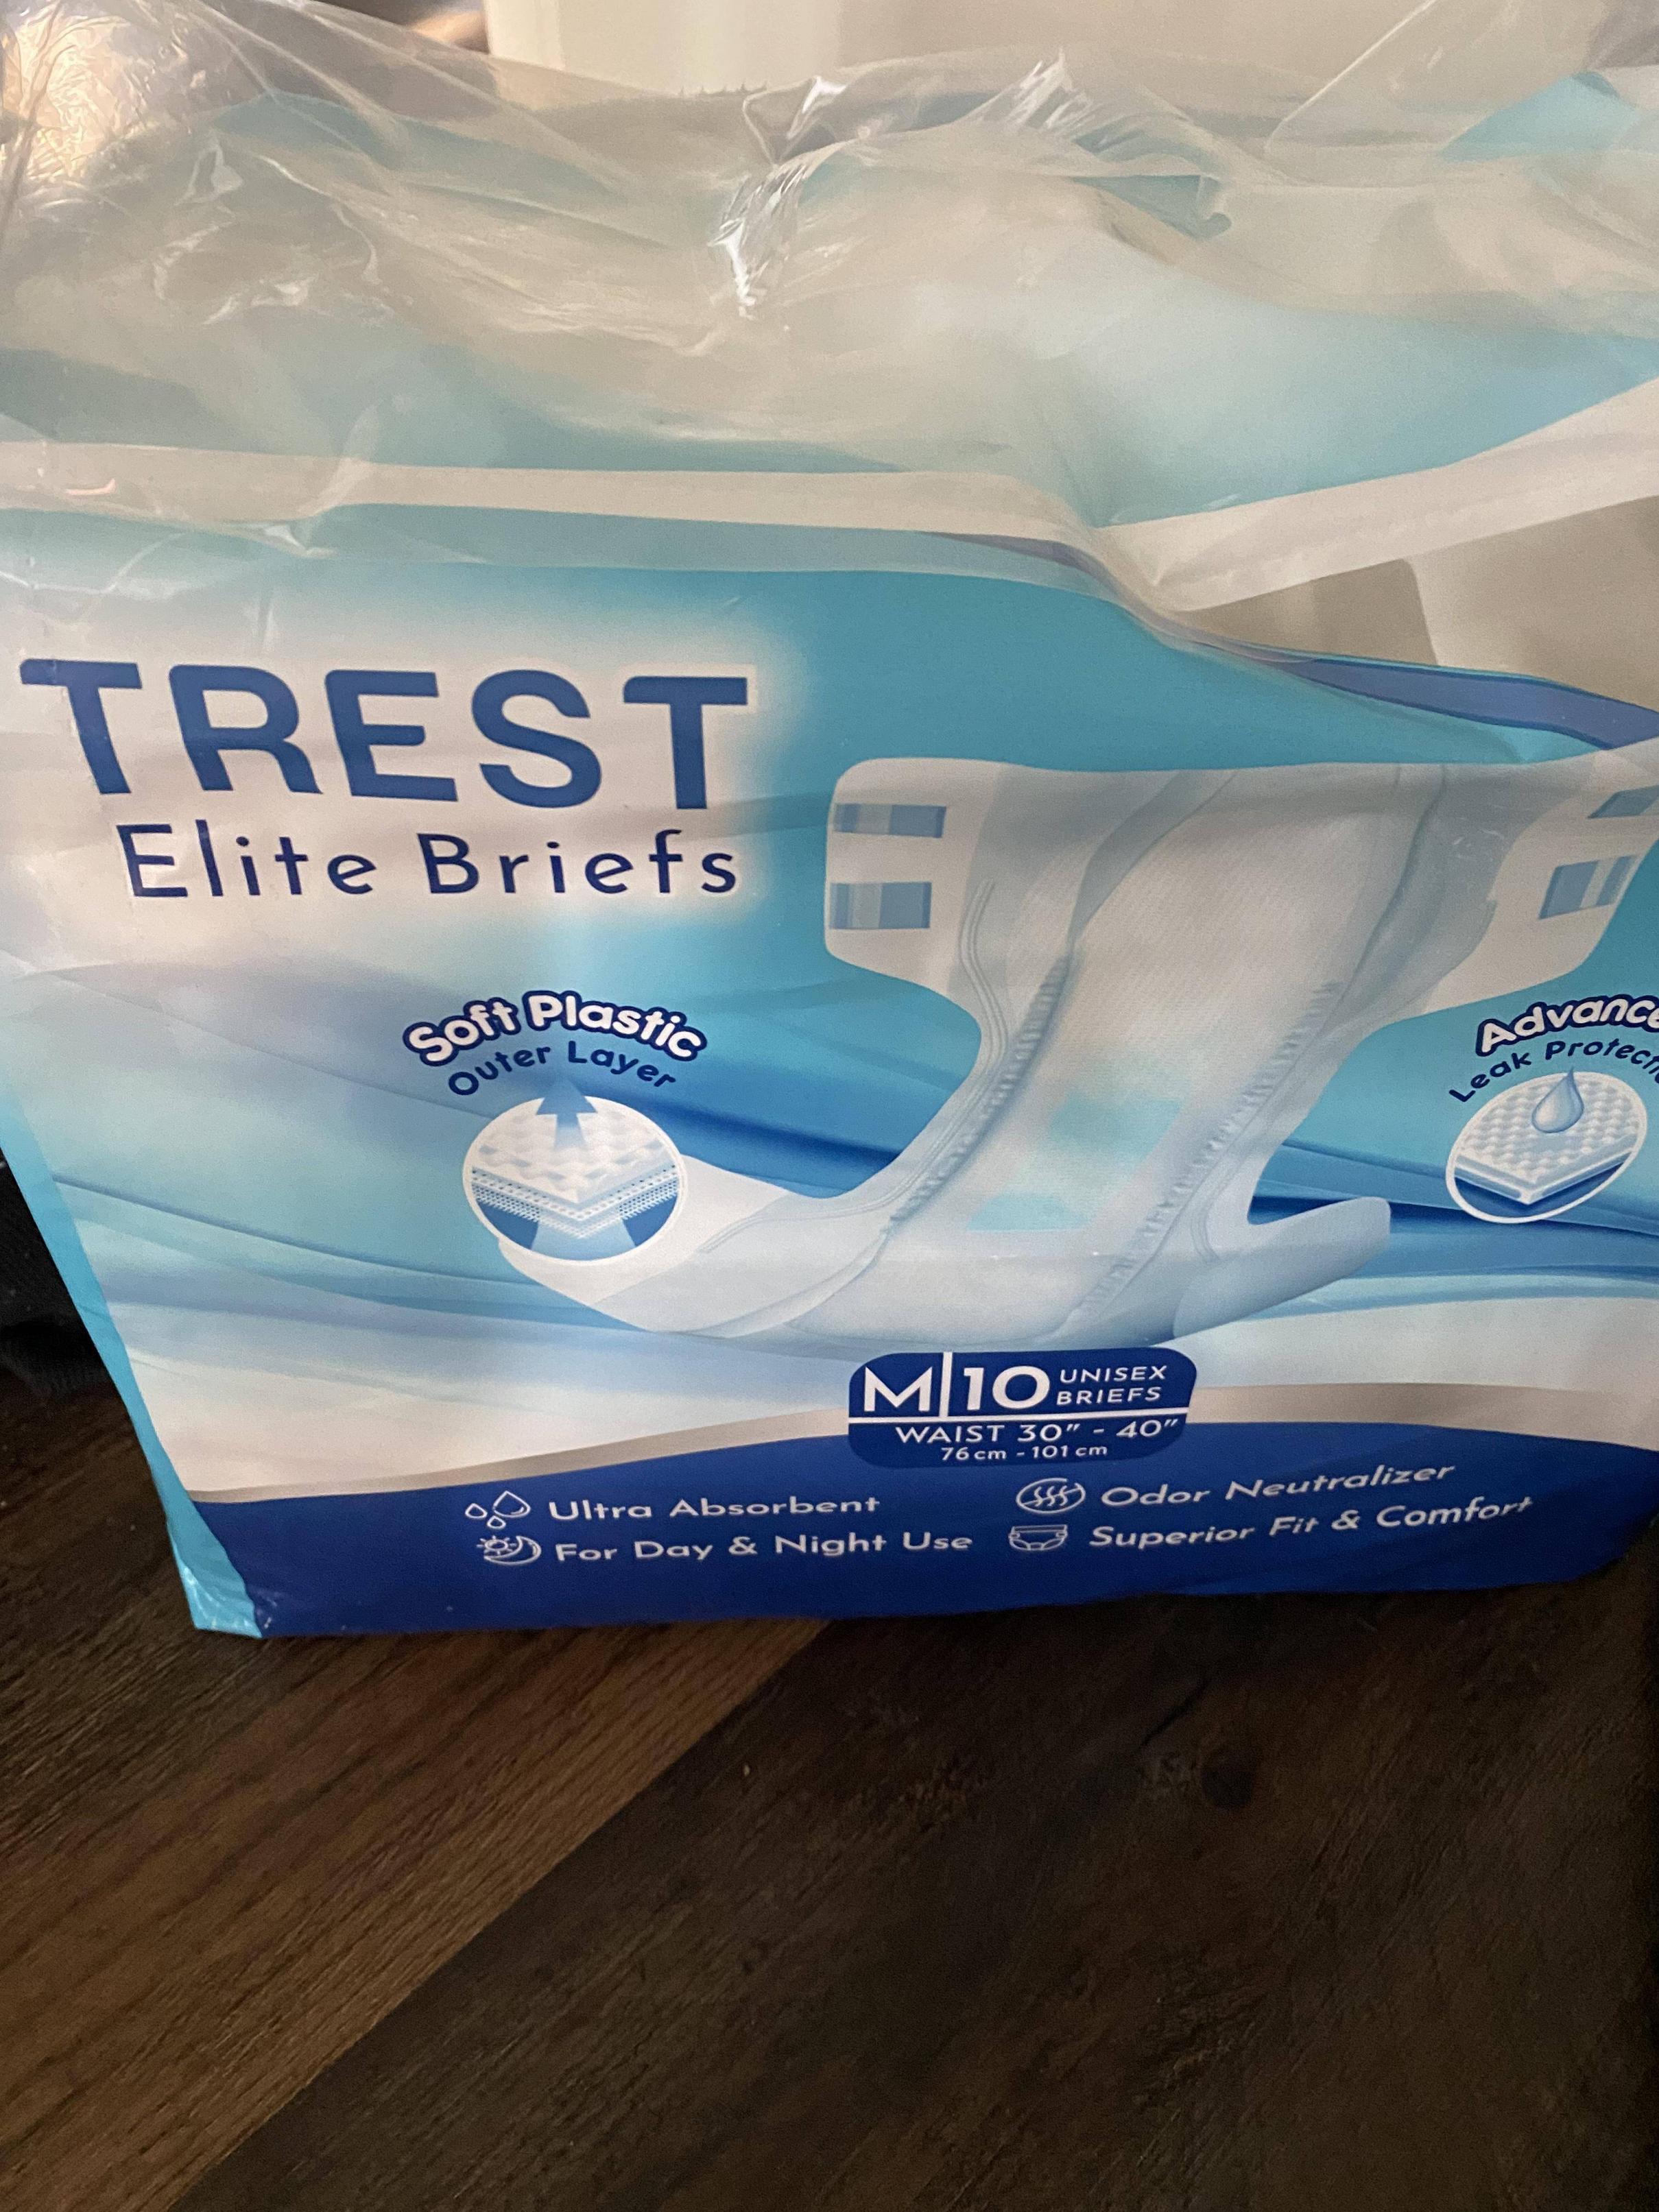 Trest elite diapers finally here! Best diapers I’ve ever worn. The get ...